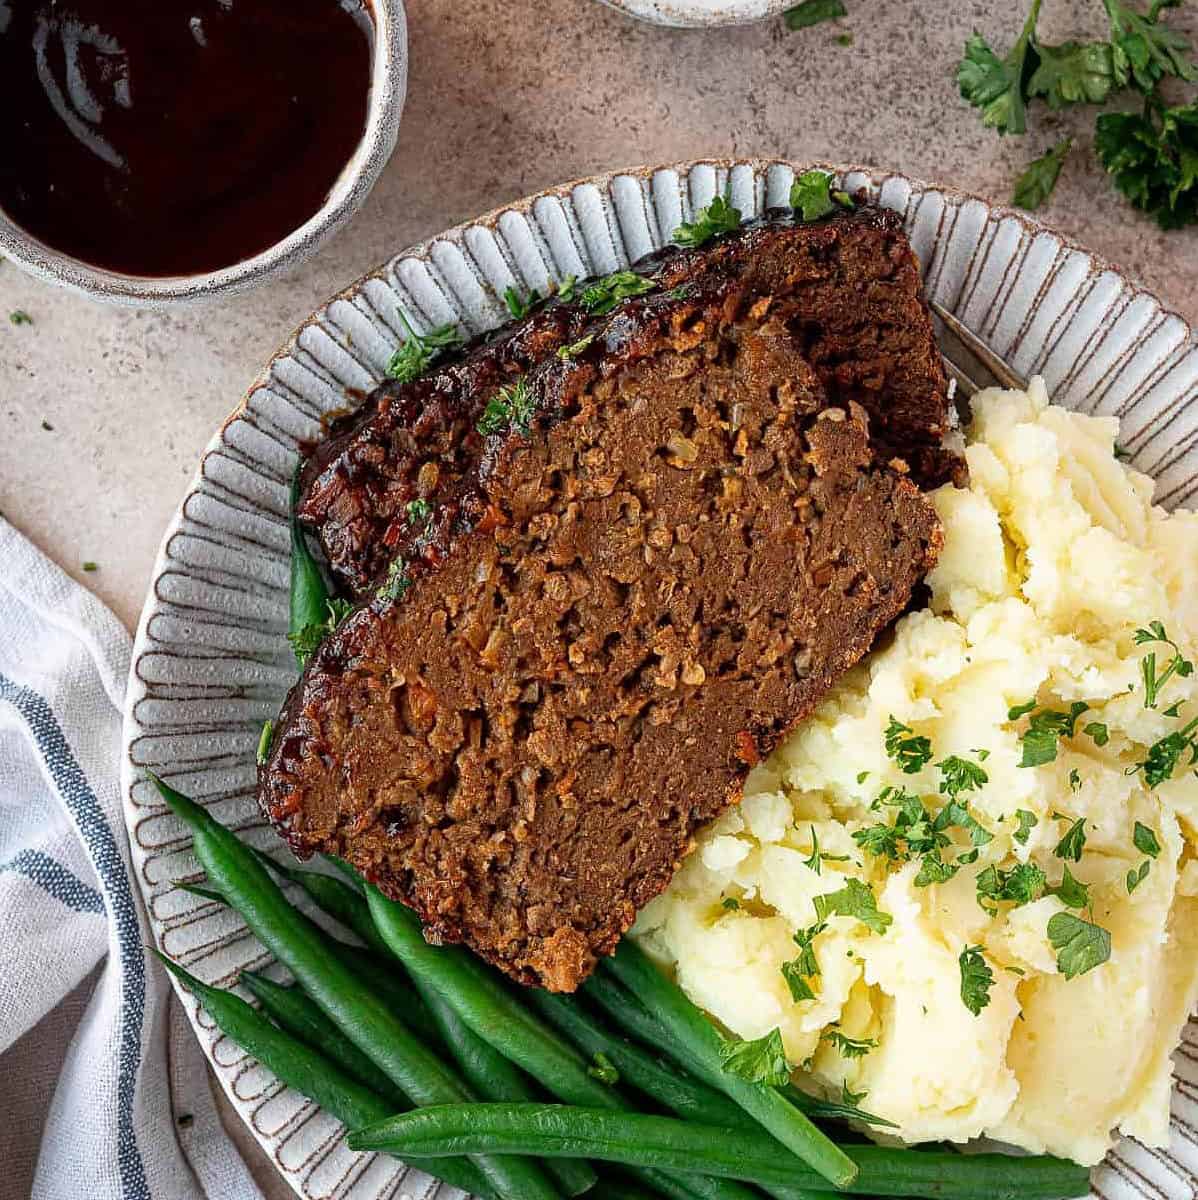  Splitting a slice of this meatless-loaf will reveal a protein-packed hearty interior.